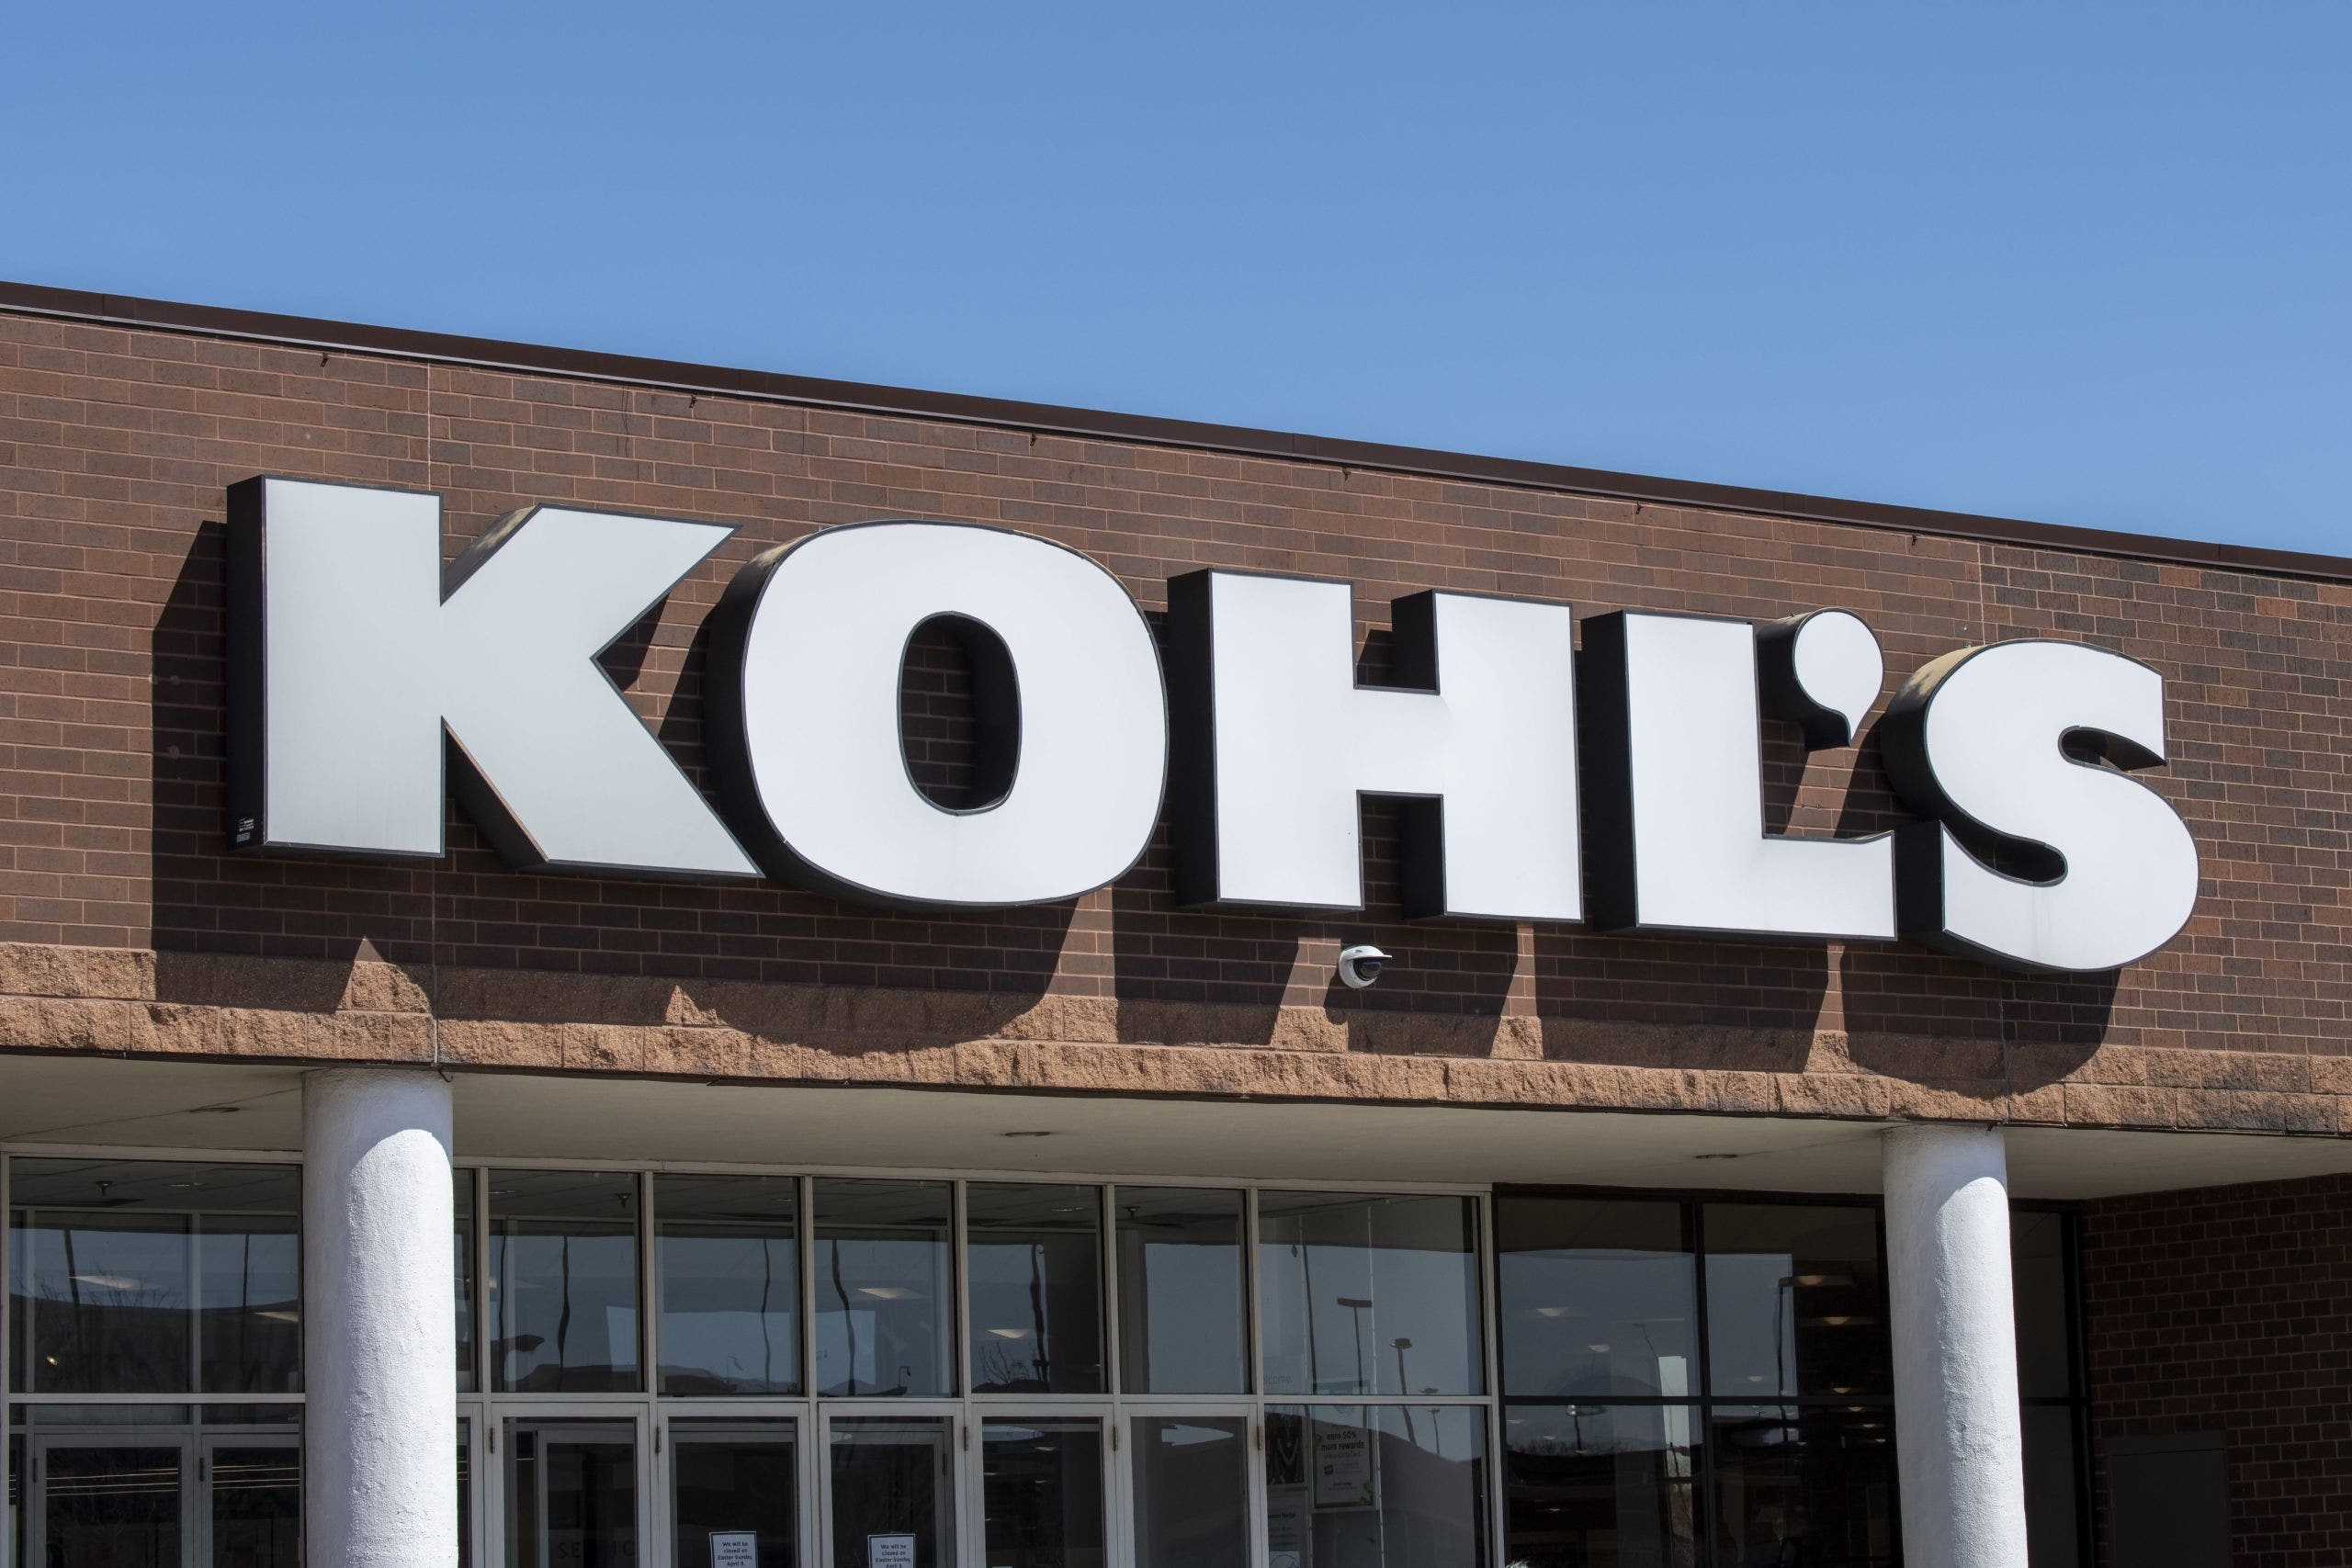 Earn Kohl’s Cash while you shop: How to use Kohl’s Rewards program [Video]